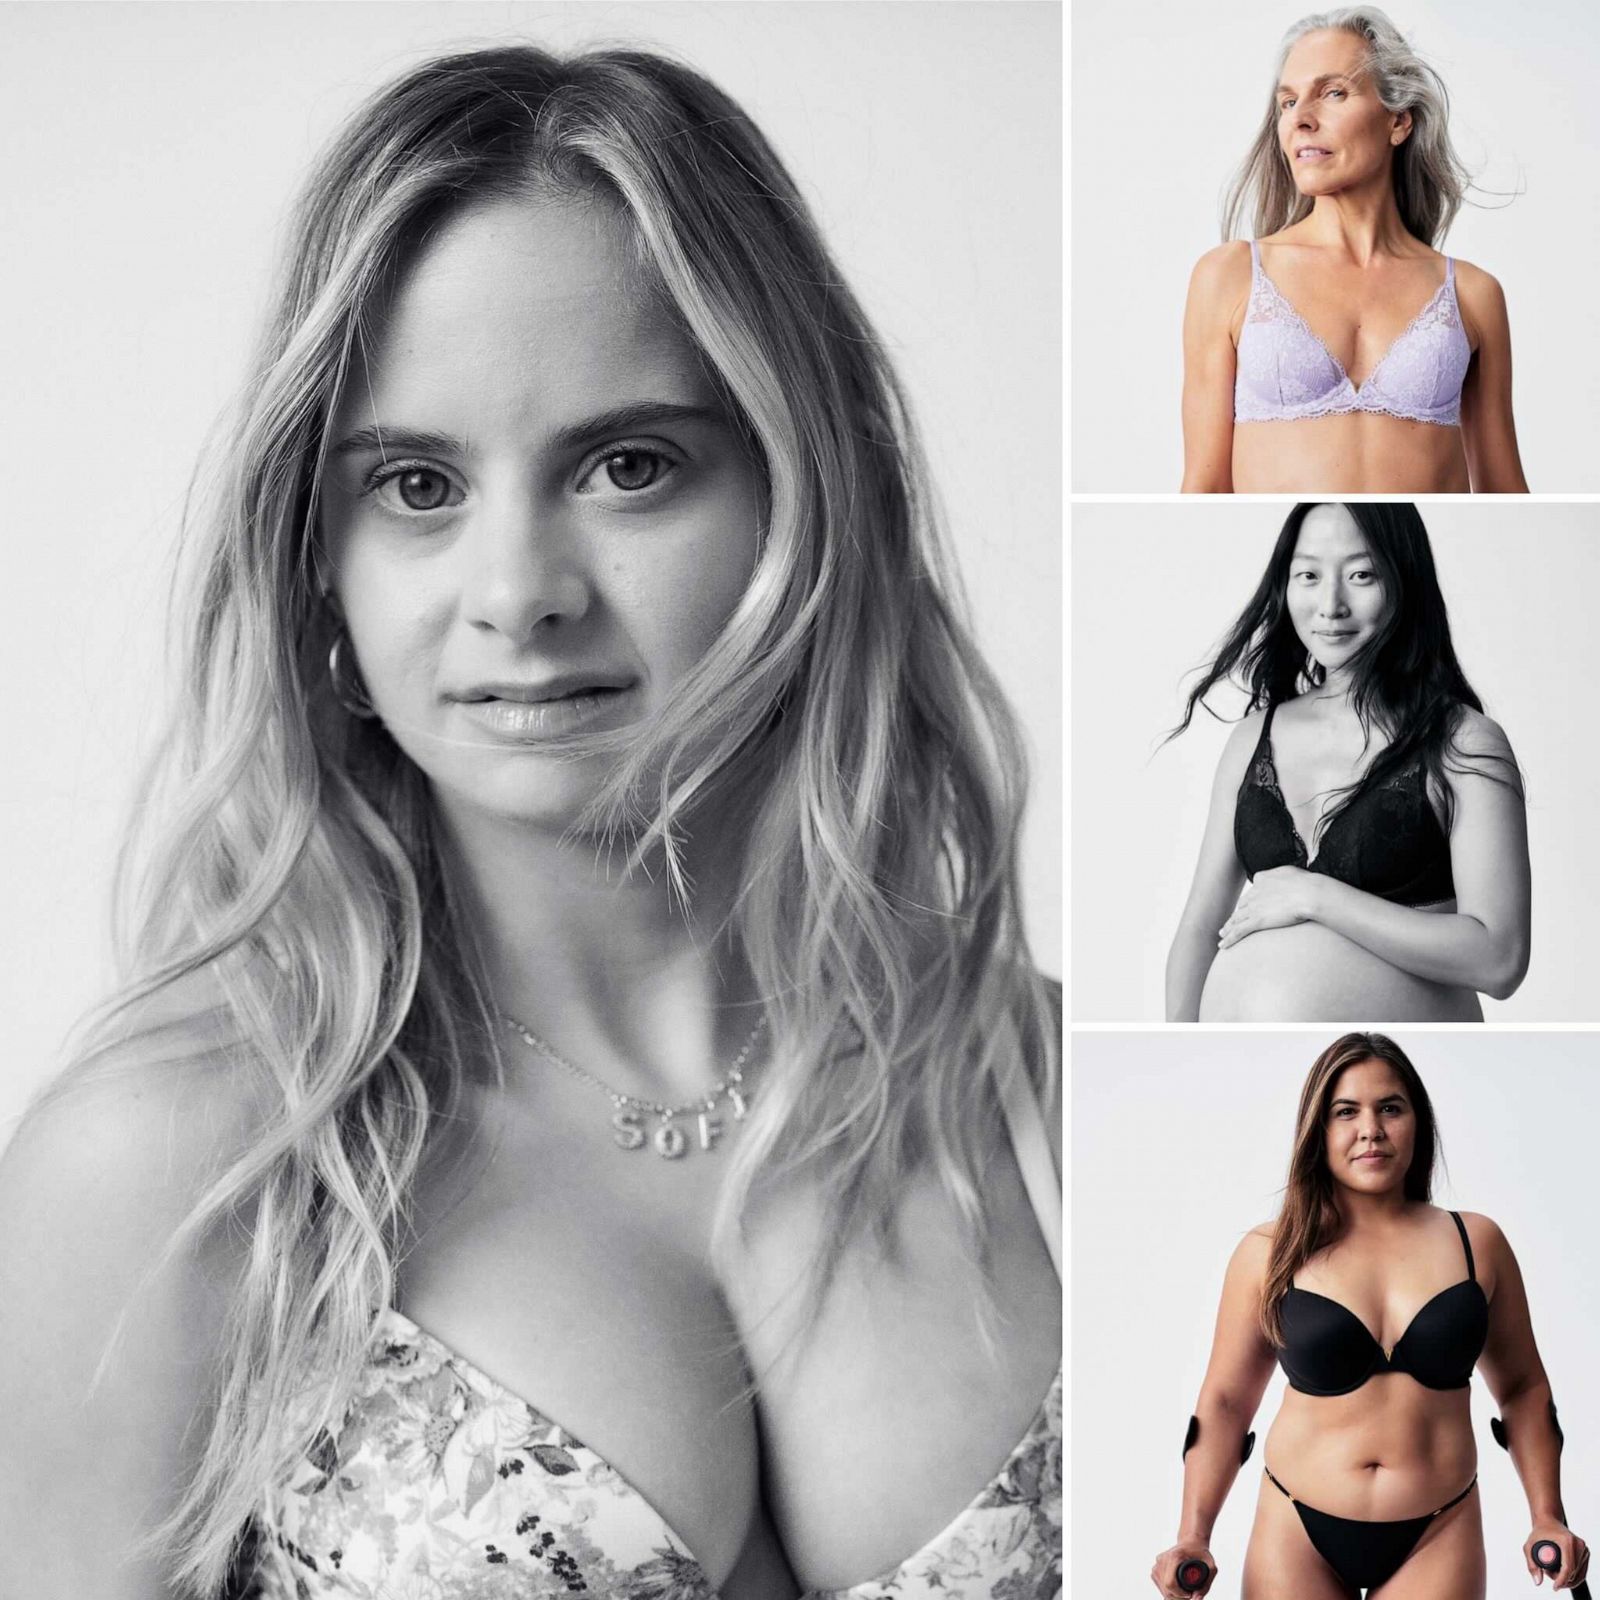 Sofia Jirau makes history as Victoria's Secret first model with